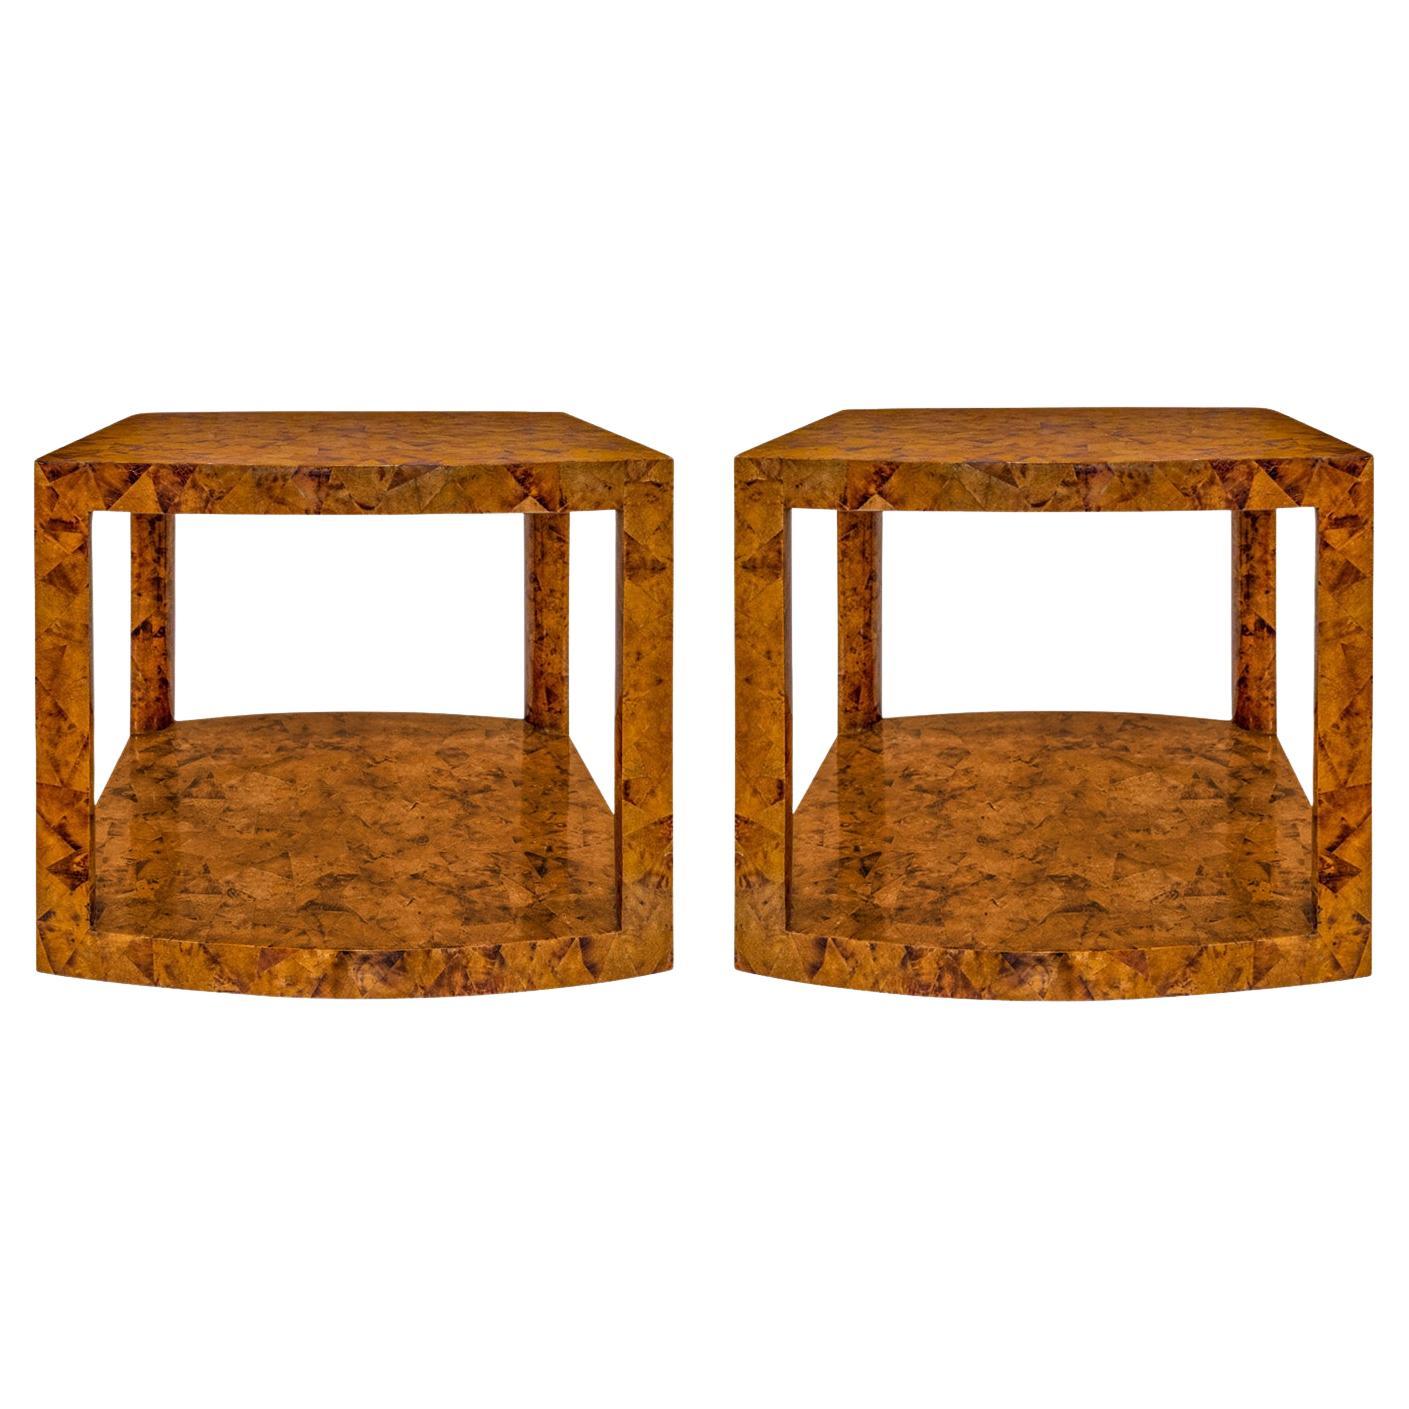 Karl Springer Pair of Large Tessellated Penshell End Tables 1980s (Signed)